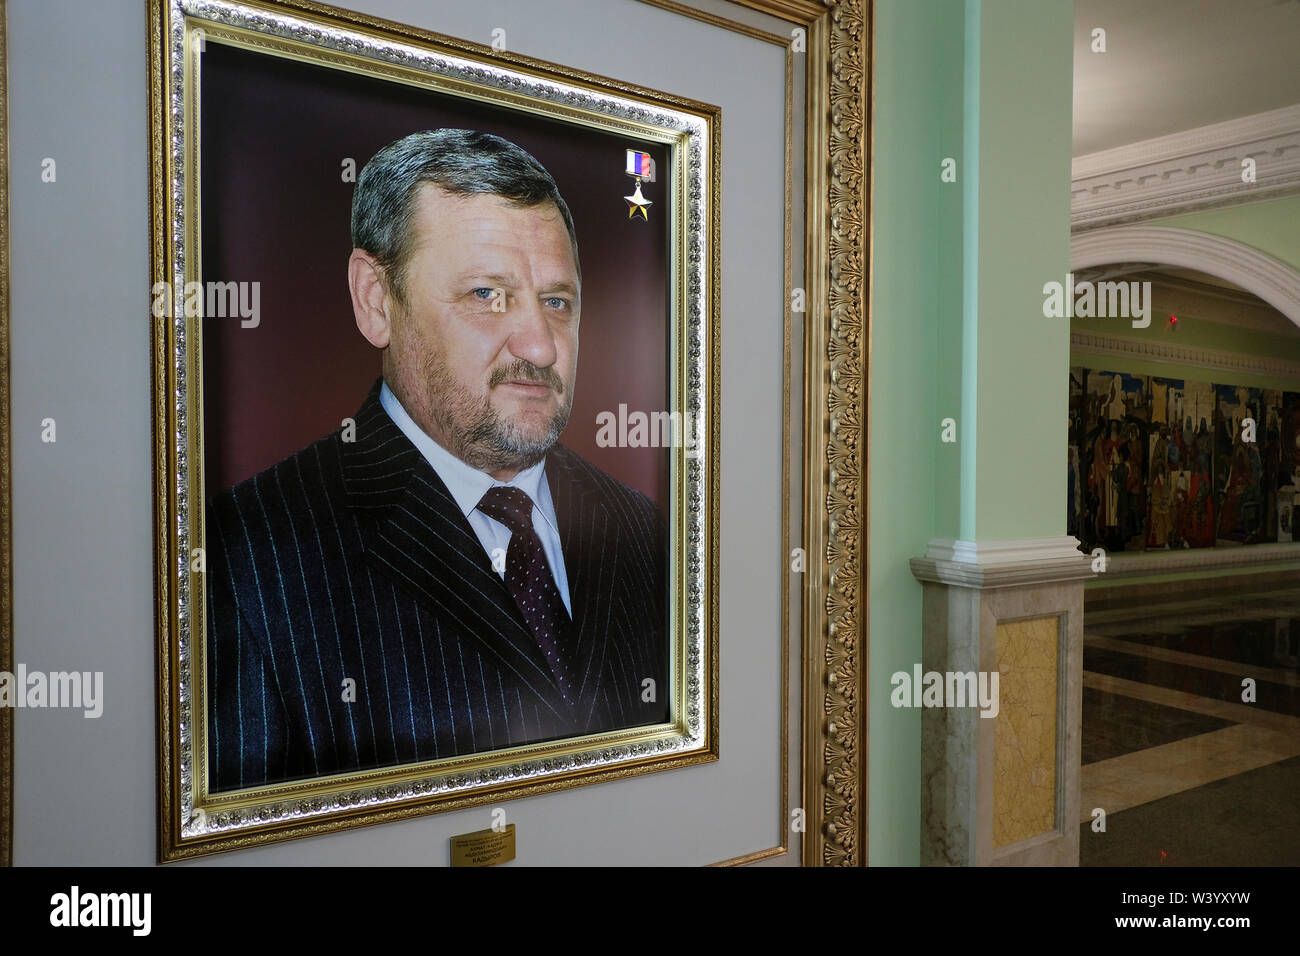 A framed image of Akhmad Kadyrov former Head of the Chechen Republic displayed at Akhmat Kadyrov museum overwhelmingly a shrine to Akhmat and Ramzan Kadyrov in Grozny the capital city of Chechnya in the North Caucasian Federal District of Russia. Stock Photo